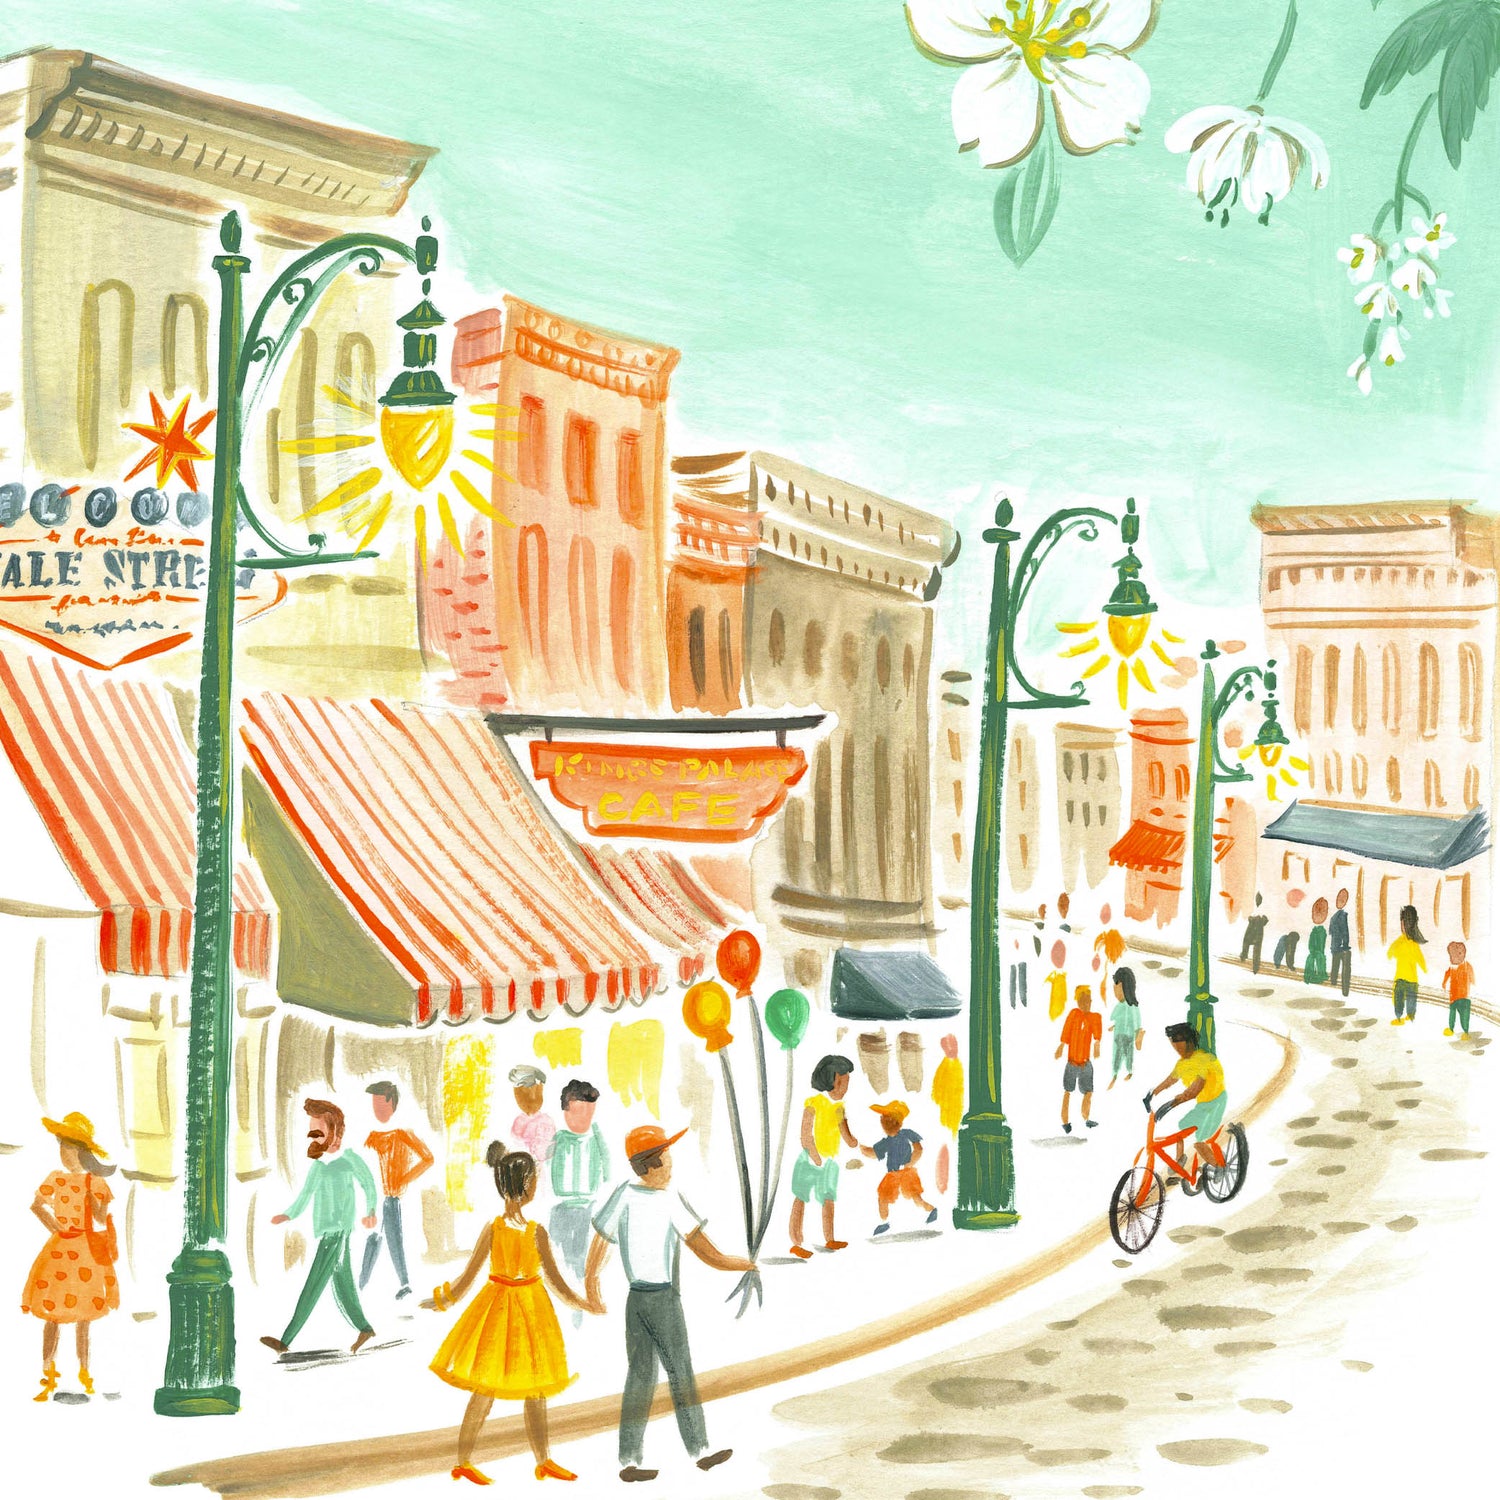 Downtown Memphis art detail with Beale Street in modern pastel colors; illustration by Angela Staehling